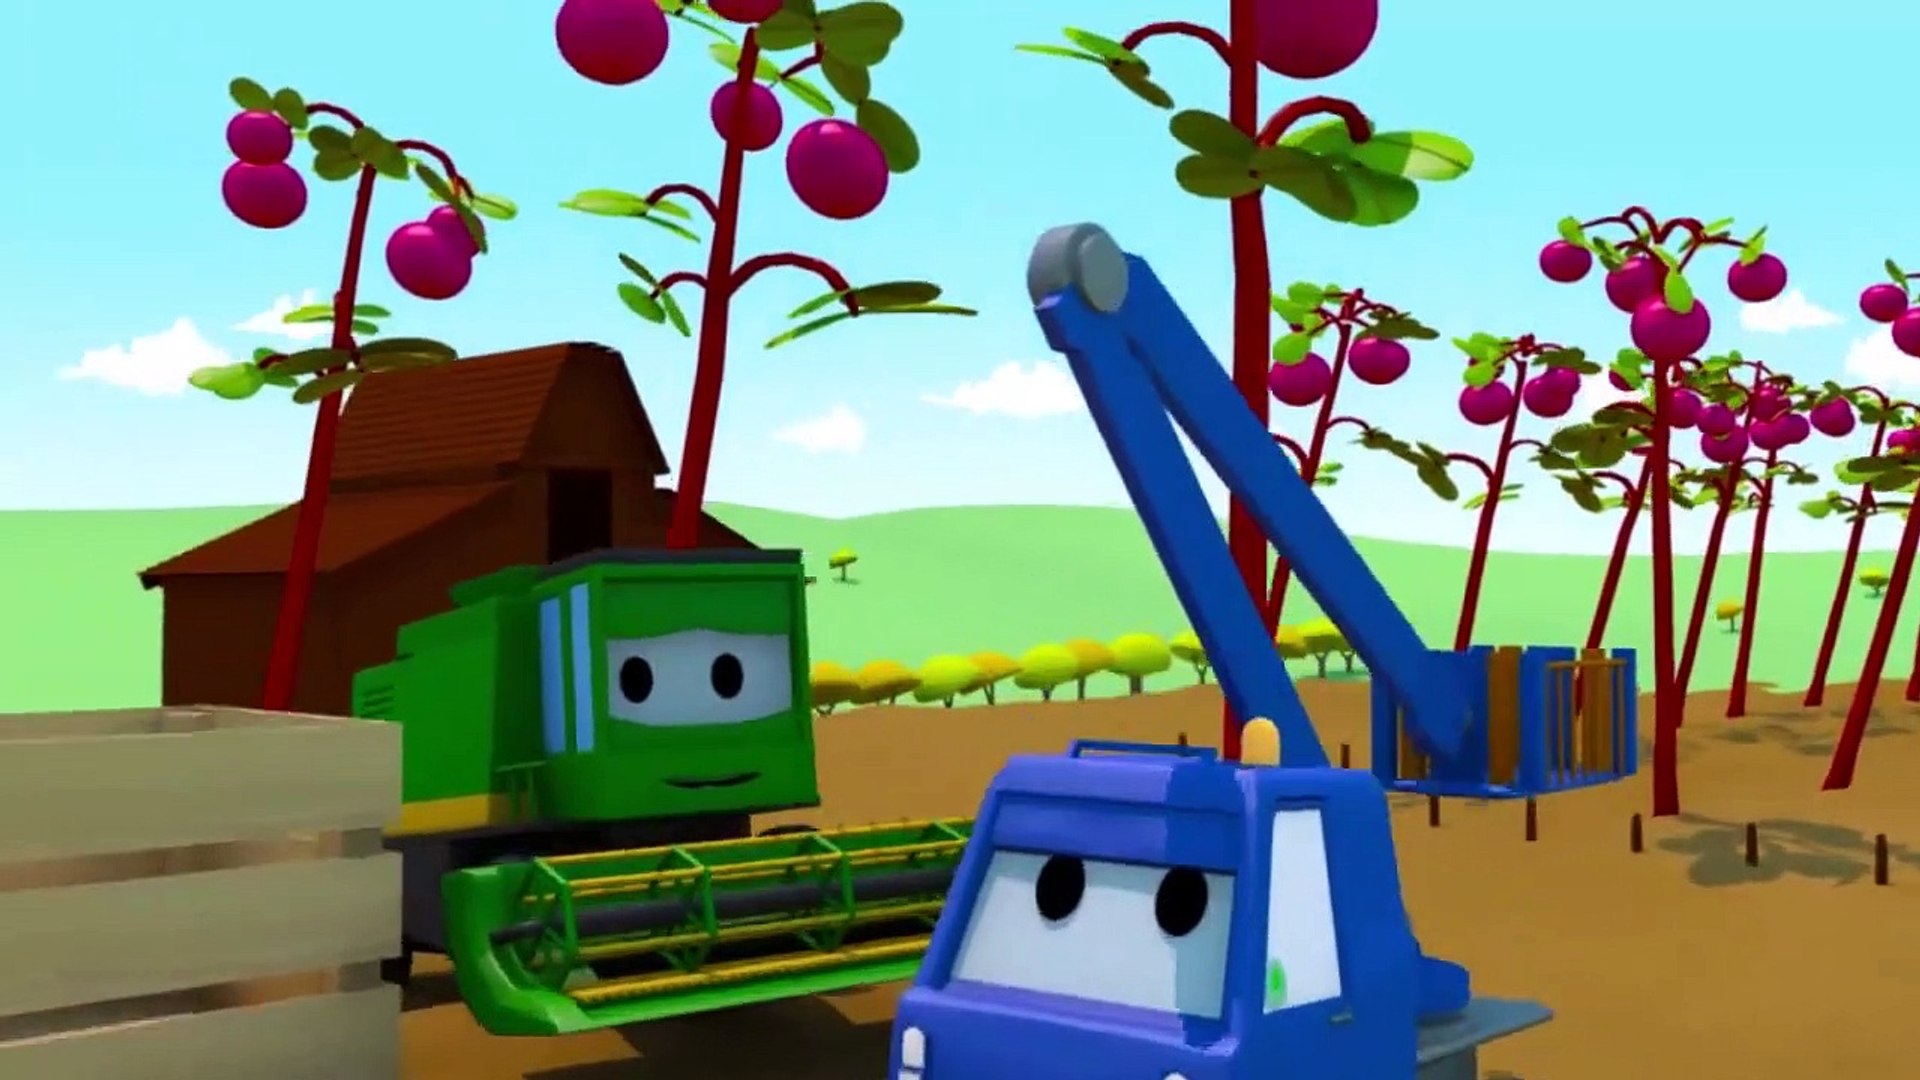 Troy The Train and Chuck the Cherry Picker in Car City | Cars & Trucks  cartoon for children - video Dailymotion